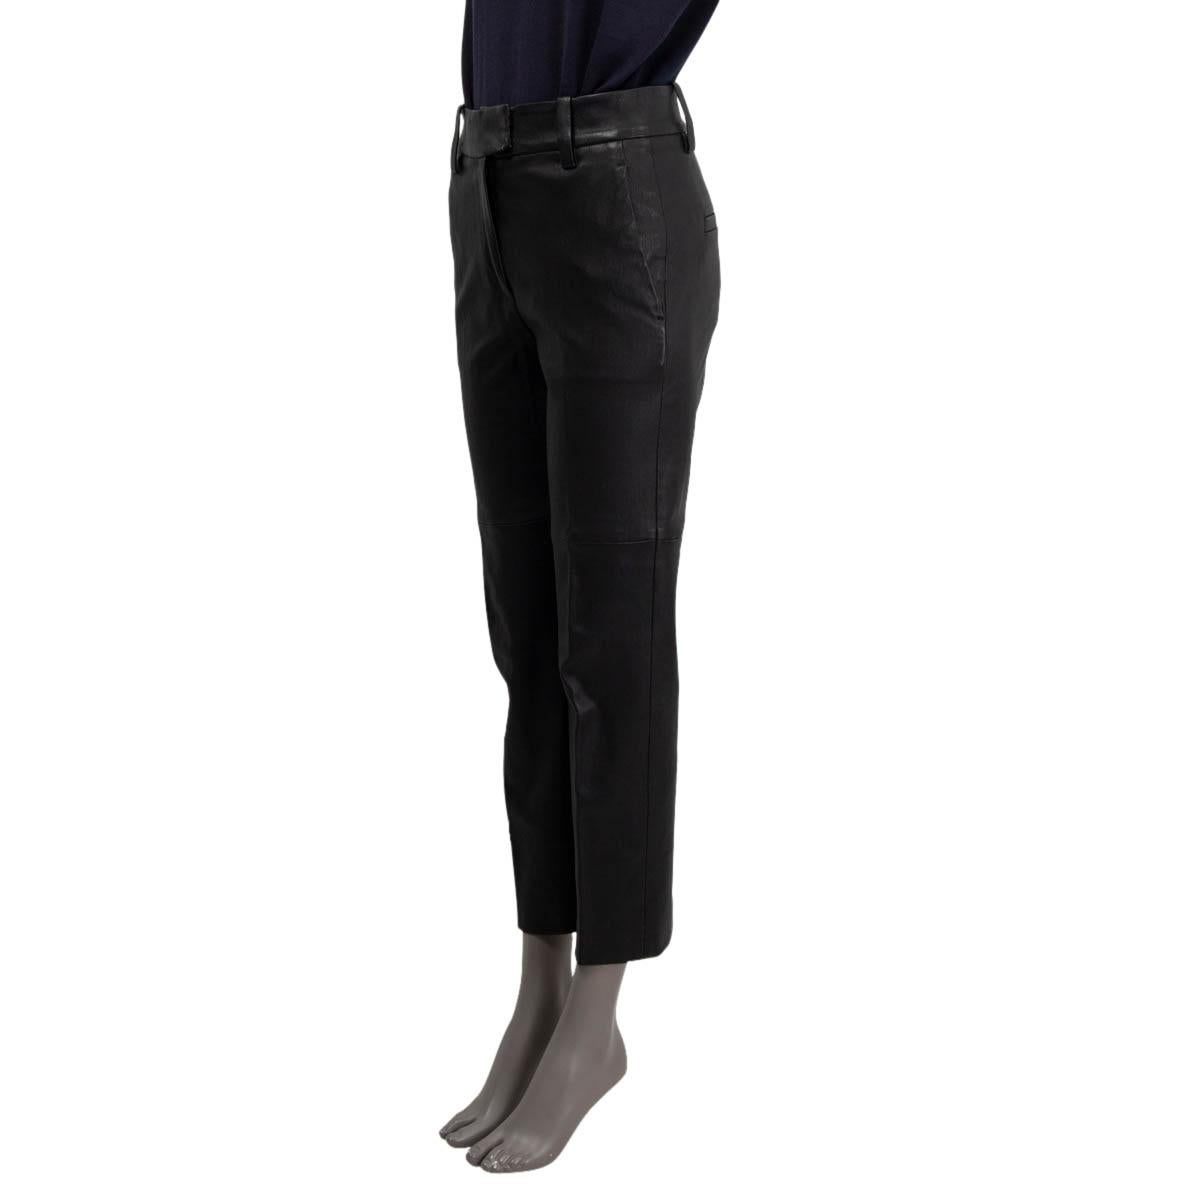 100% authentic Brunello Cucinelli high-waisted cropped trousers in black stretch leather (100%) with belt loops, two pockets on the sides, and two buttoned welt-pockets on the back. Close on the front with with a zipper and hook fastener. Lined in